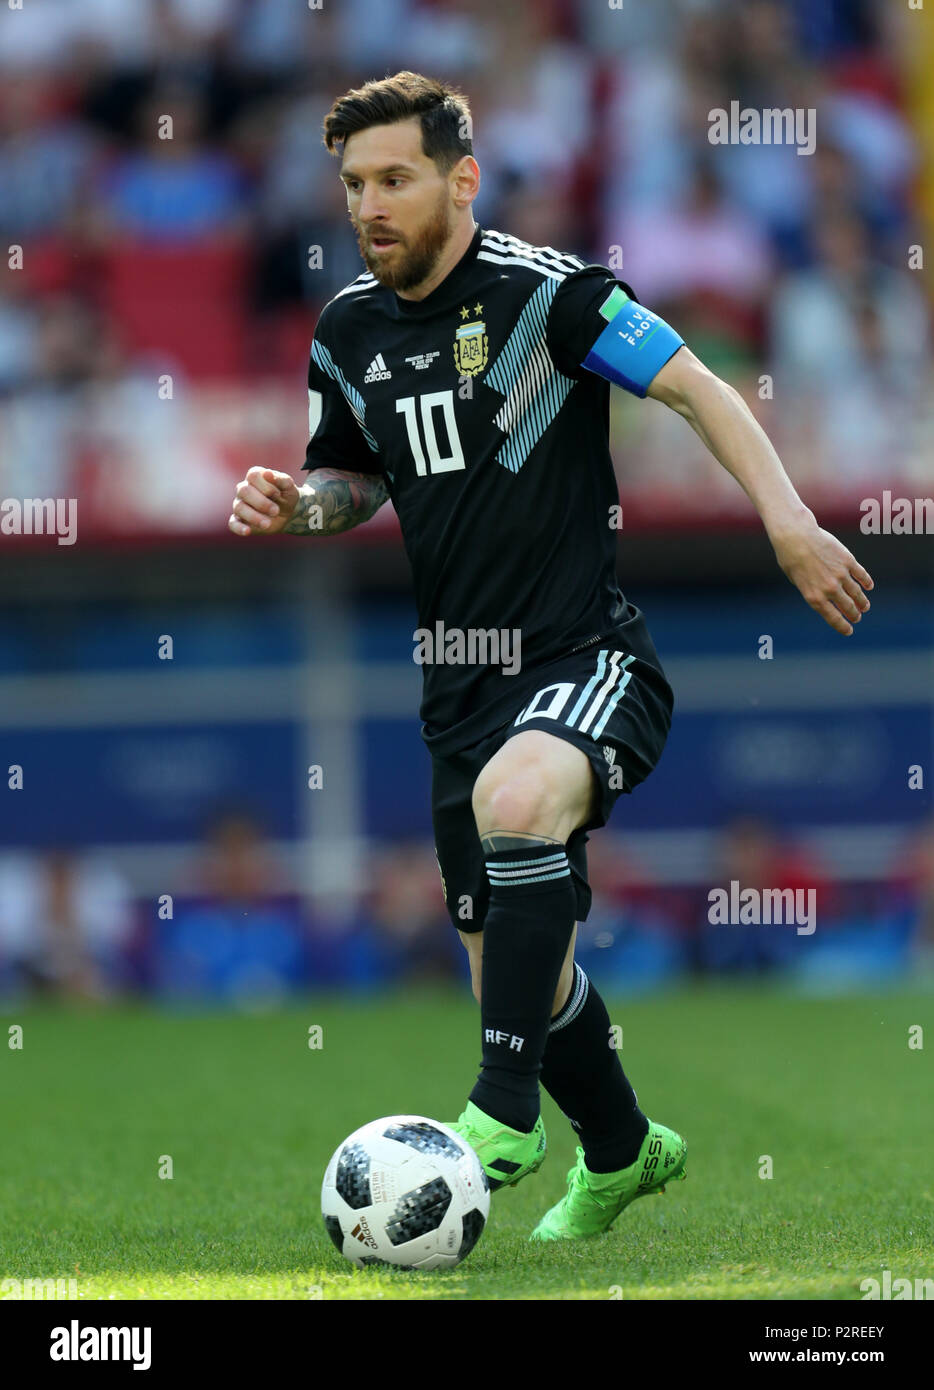 Lionel Messi ARGENTINA ARGENTINA V ICELAND, 2018 FIFA WORLD CUP RUSSIA 16 June 2018 GBC8148 Argentina v Iceland 2018 FIFA World Cup Russia Spartak Stadium Moscow STRICTLY EDITORIAL USE ONLY. If The Player/Players Depicted In This Image Is/Are Playing For An English Club Or The England National Team. Then This Image May Only Be Used For Editorial Purposes. No Commercial Use. The Following Usages Are Also Restricted EVEN IF IN AN EDITORIAL CONTEXT: Use in conjuction with, or part of, any unauthorized audio, video, data, fixture lists, club/league logos, Betting, Games or any ' Stock Photo